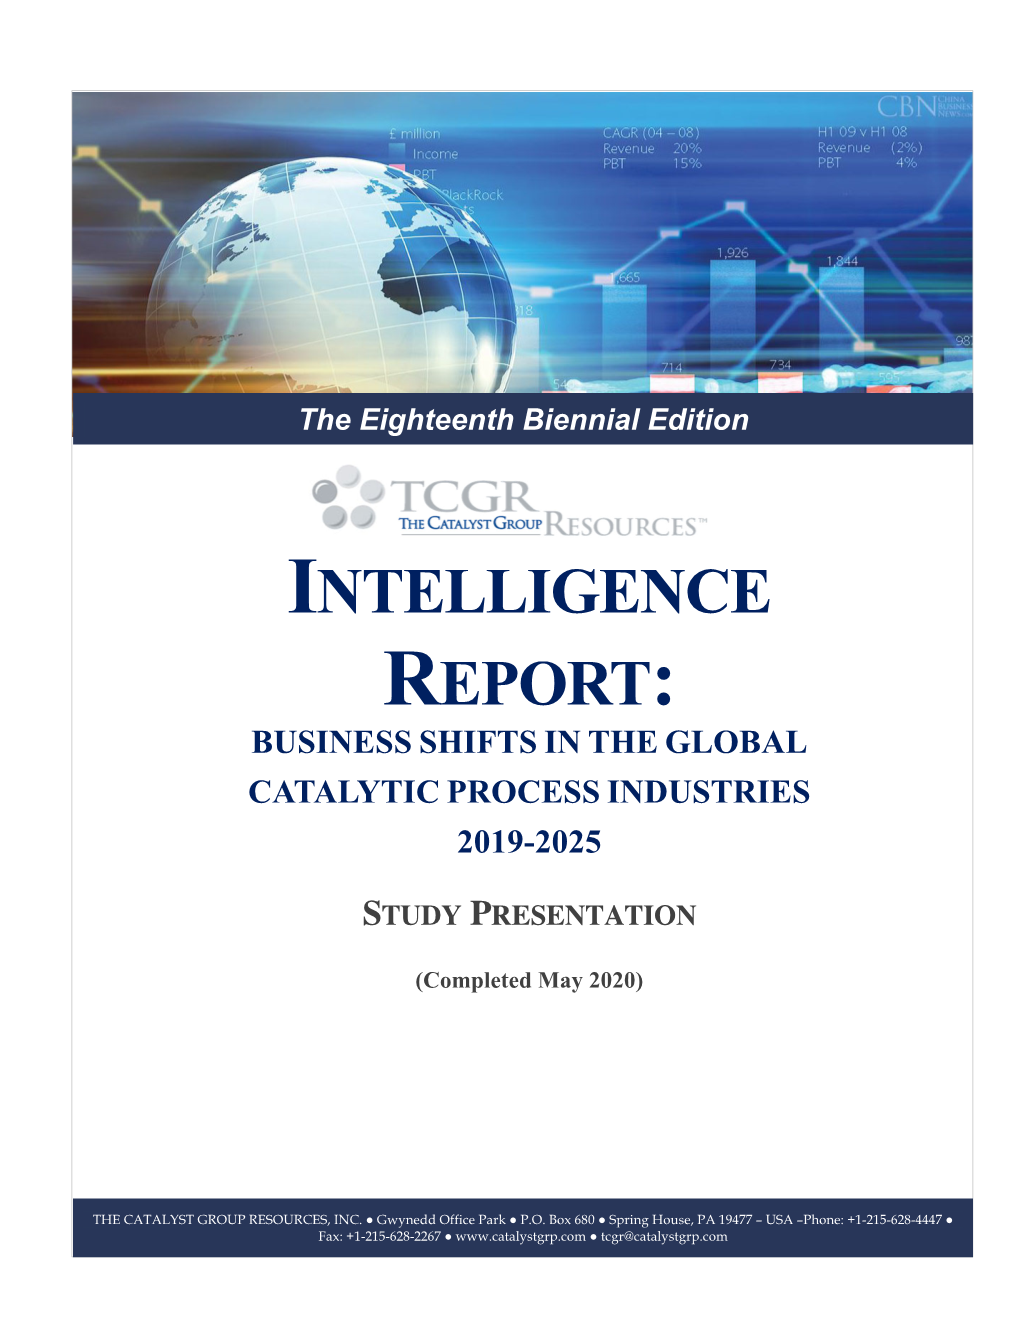 Intelligence Report: Business Shifts in the Global Catalytic Process Industries 2019-2025